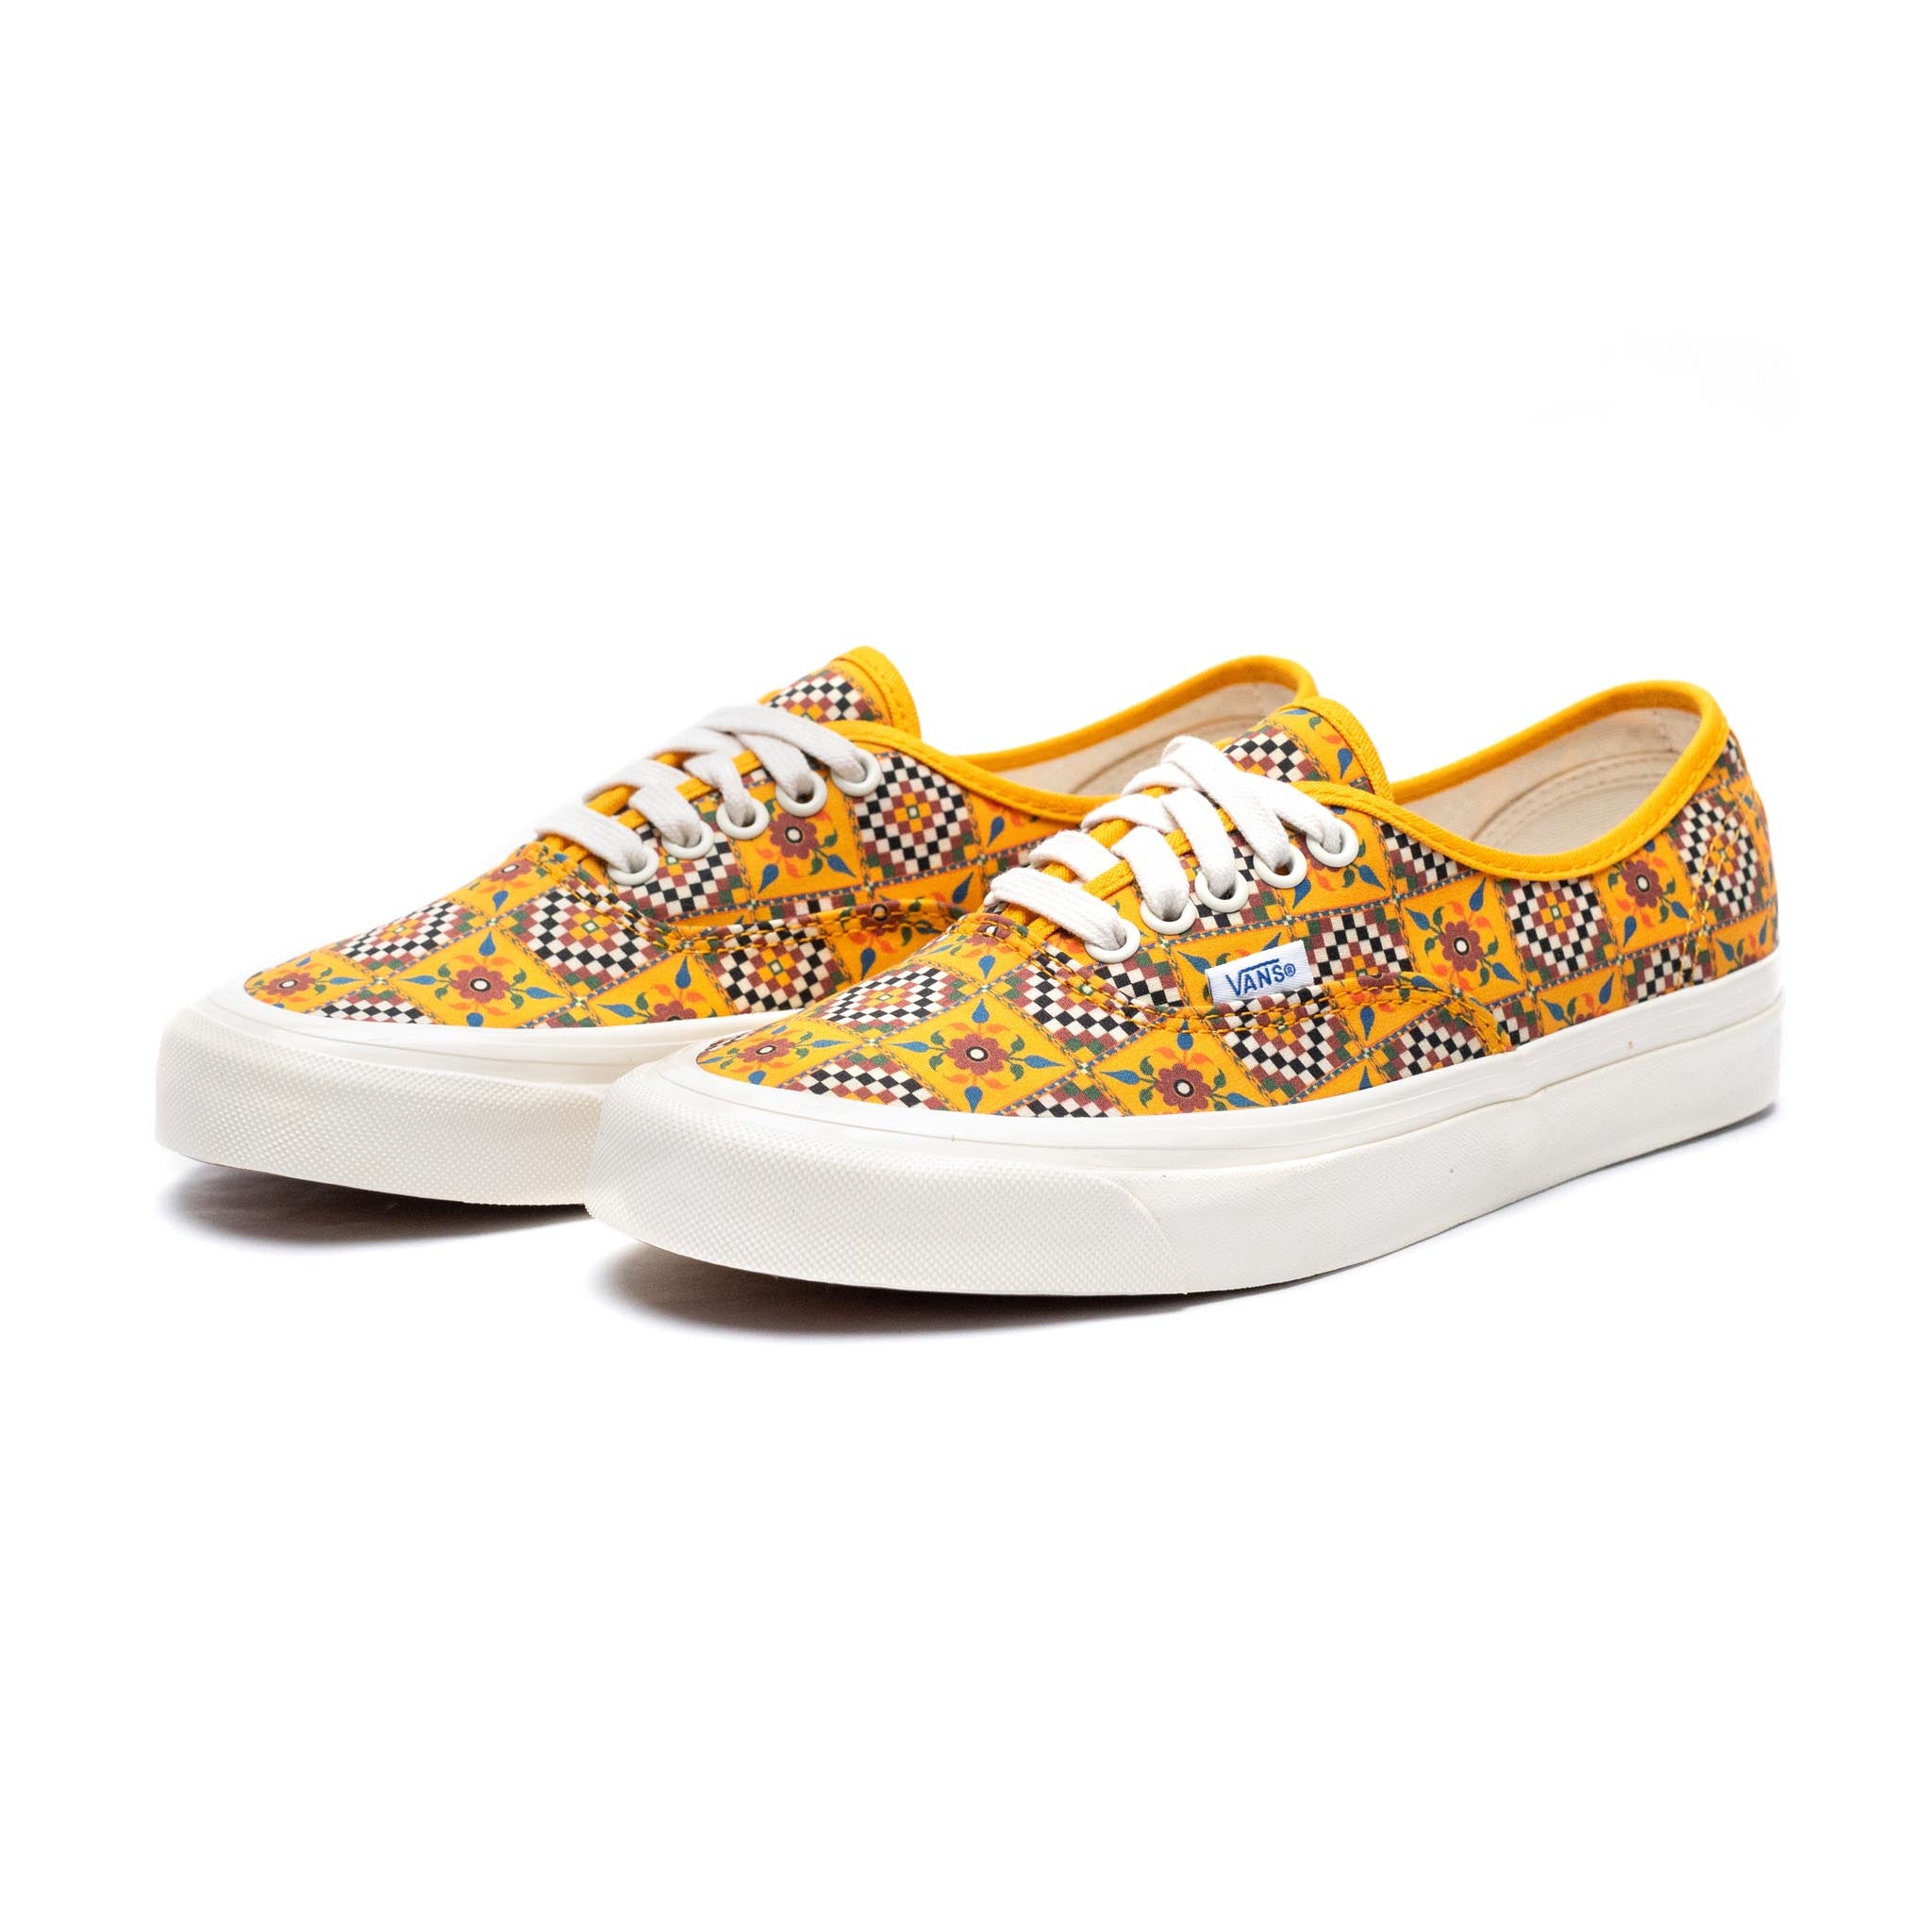 Vans Anaheim Factory Authentic 44 DX Tile Checkerboard/Radiant Yellow